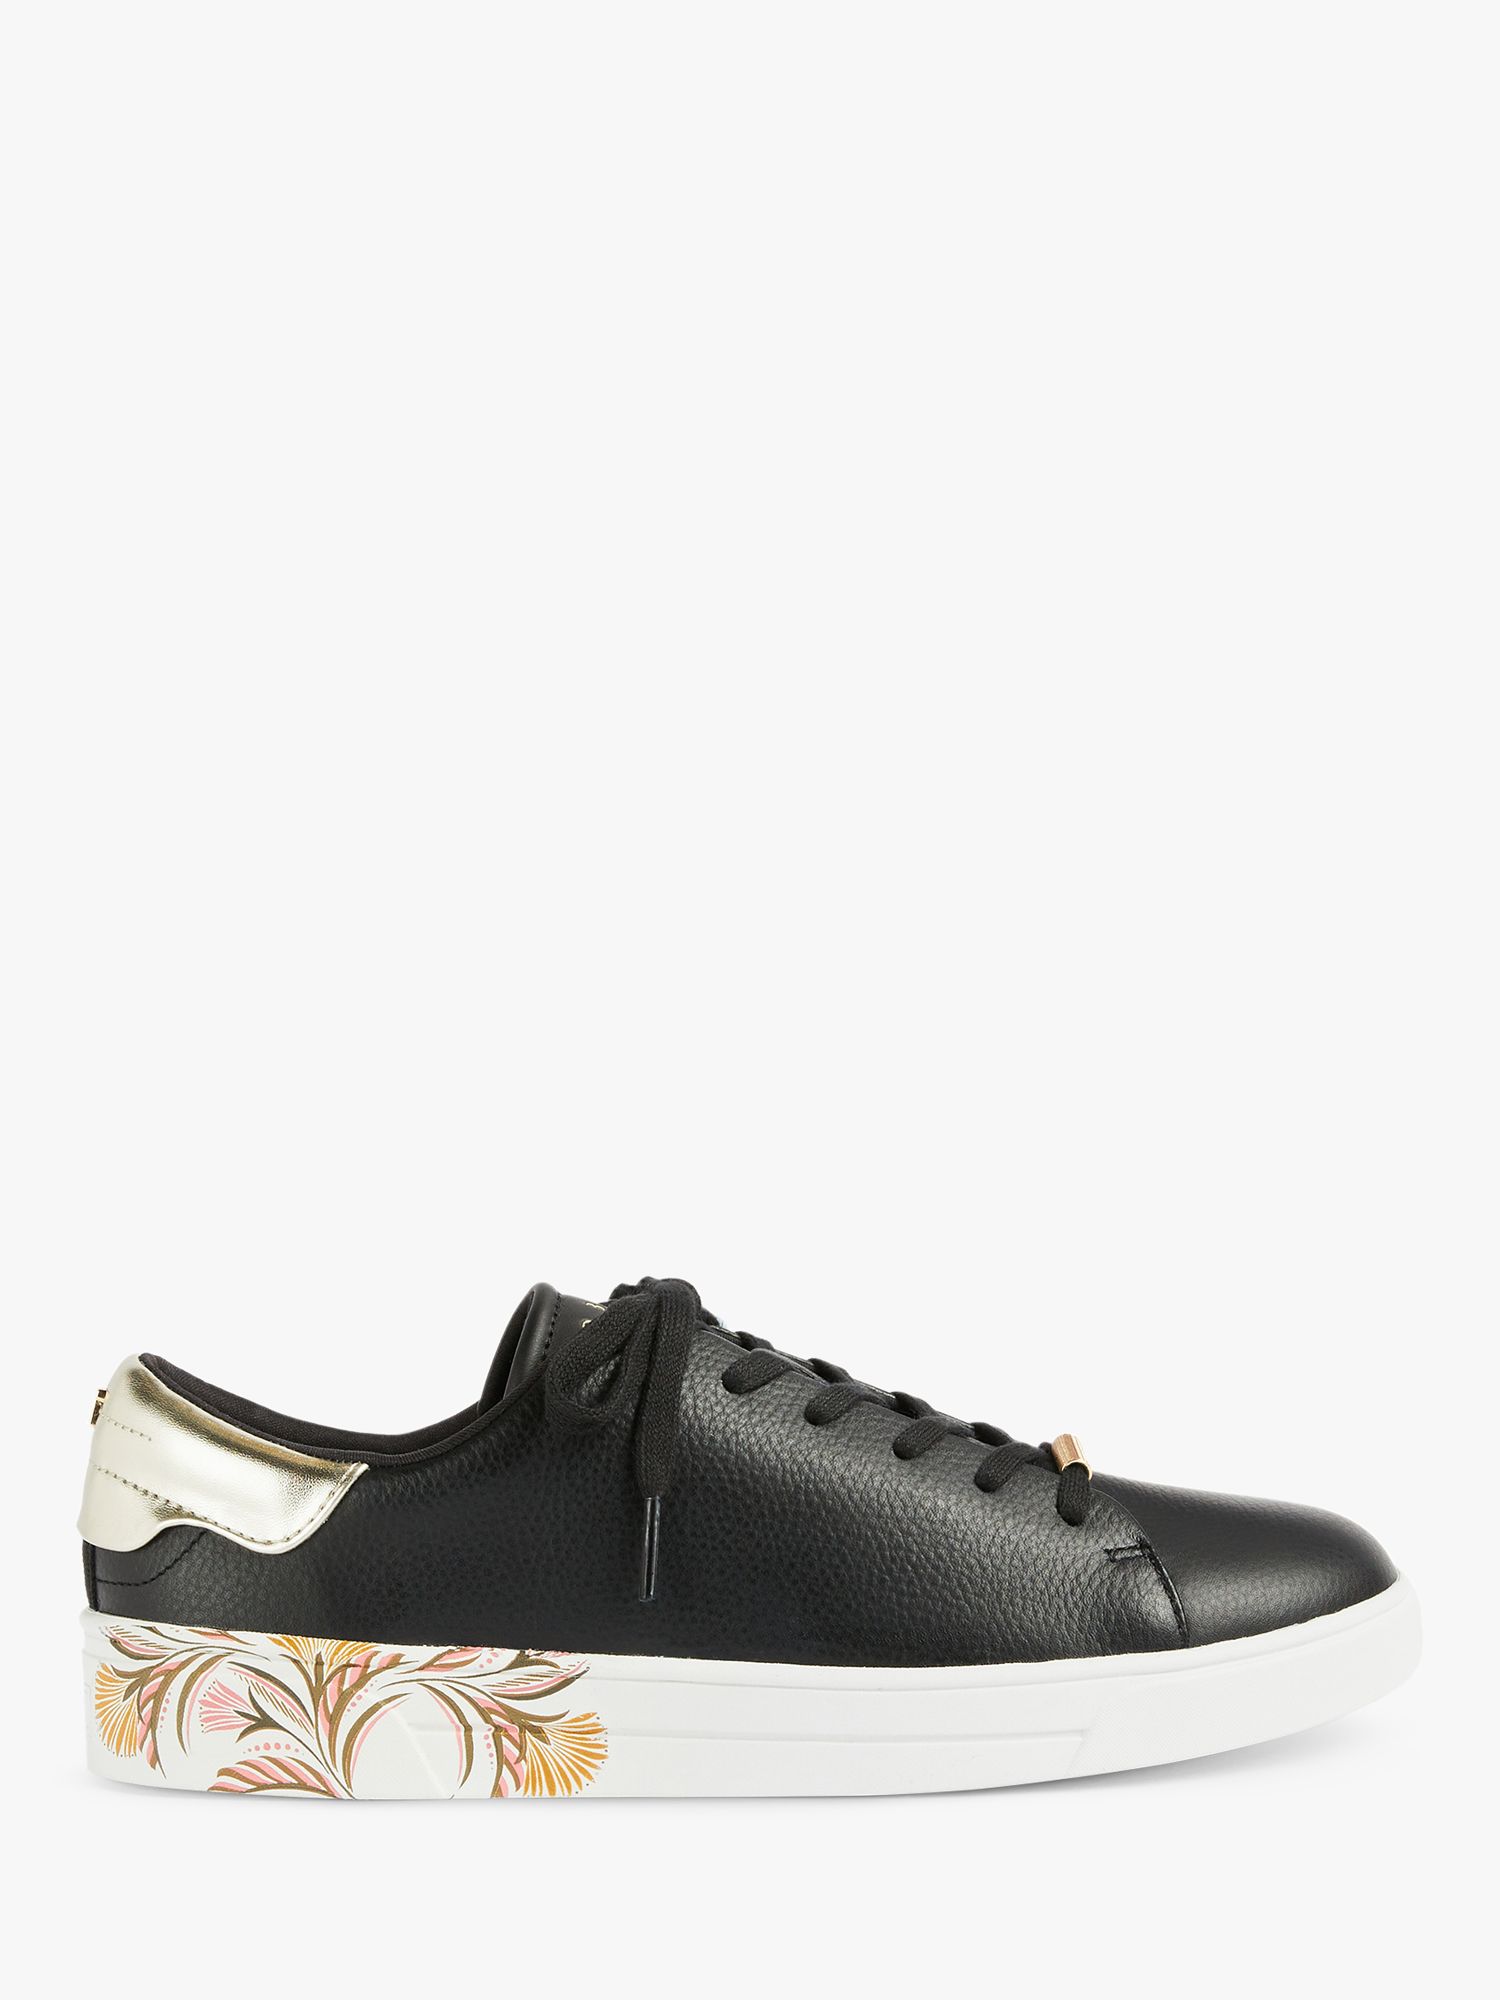 Ted Baker Tiriey Leather Floral Trainers, Black at John Lewis & Partners